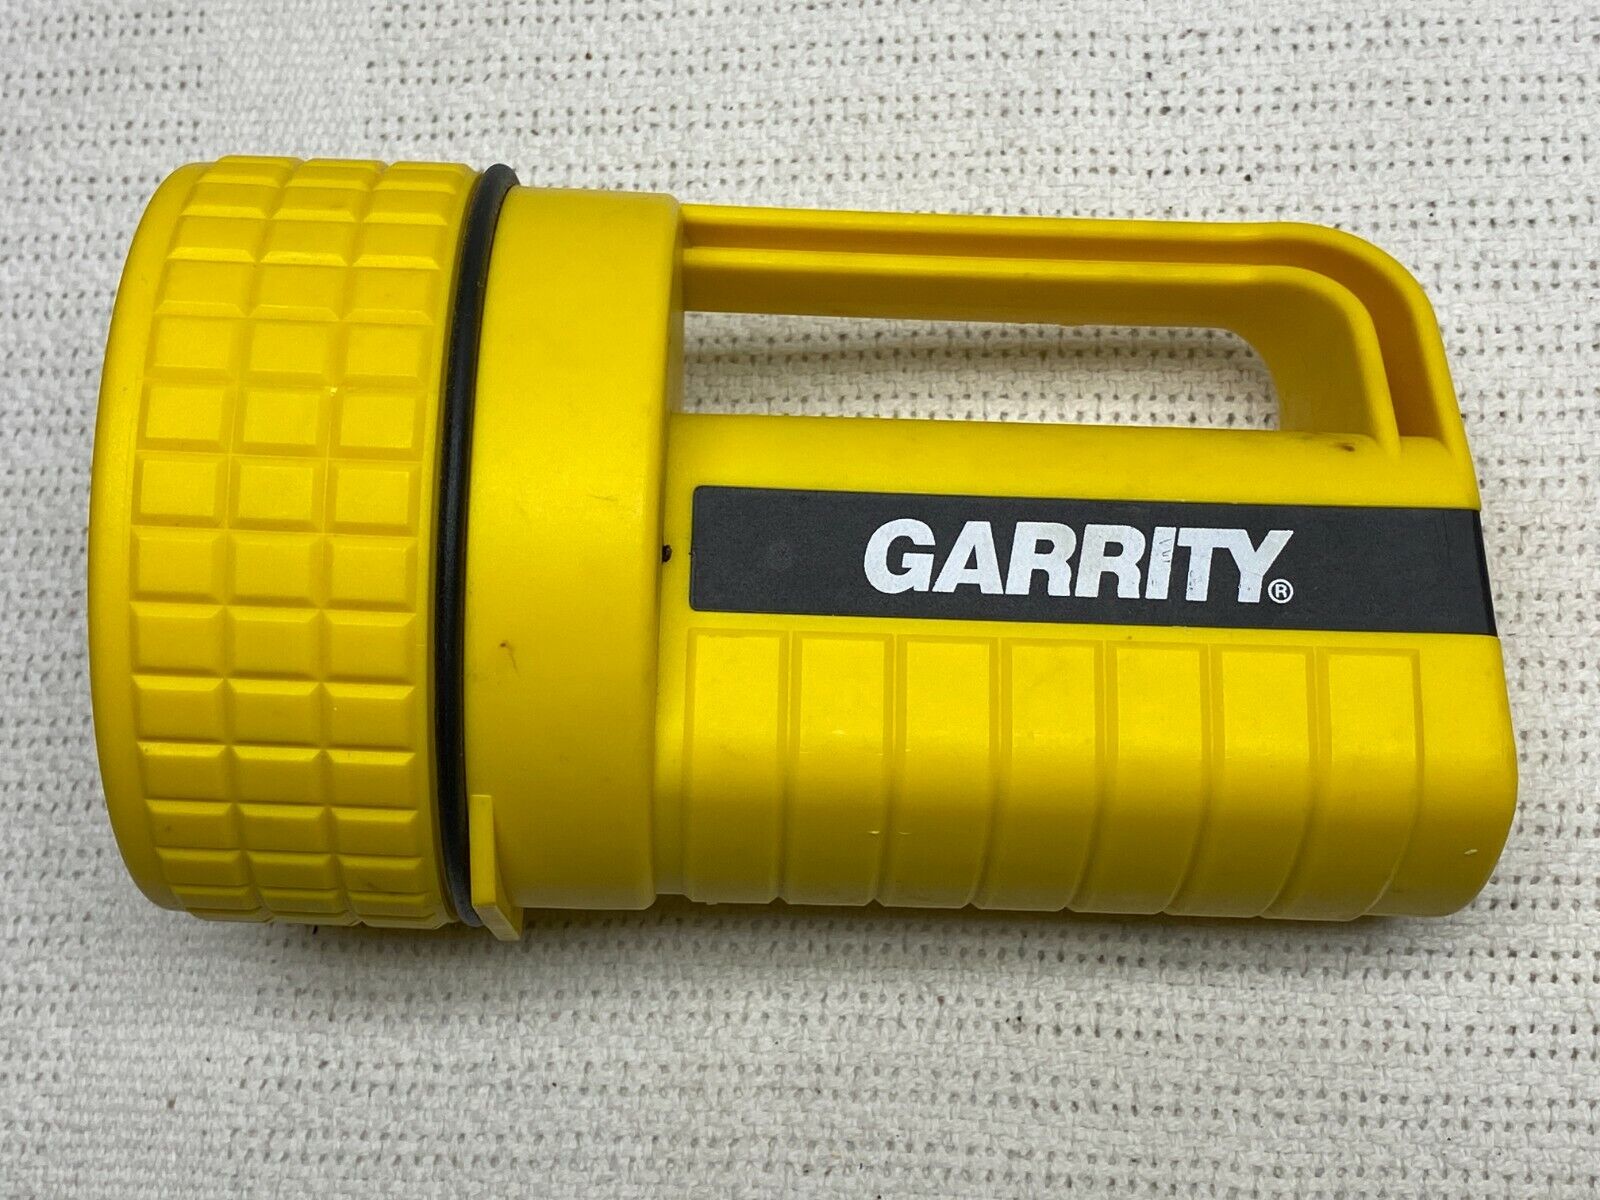 Garrity Flash Light Heavy Duty 6V Battery or 4d Cells With Speci